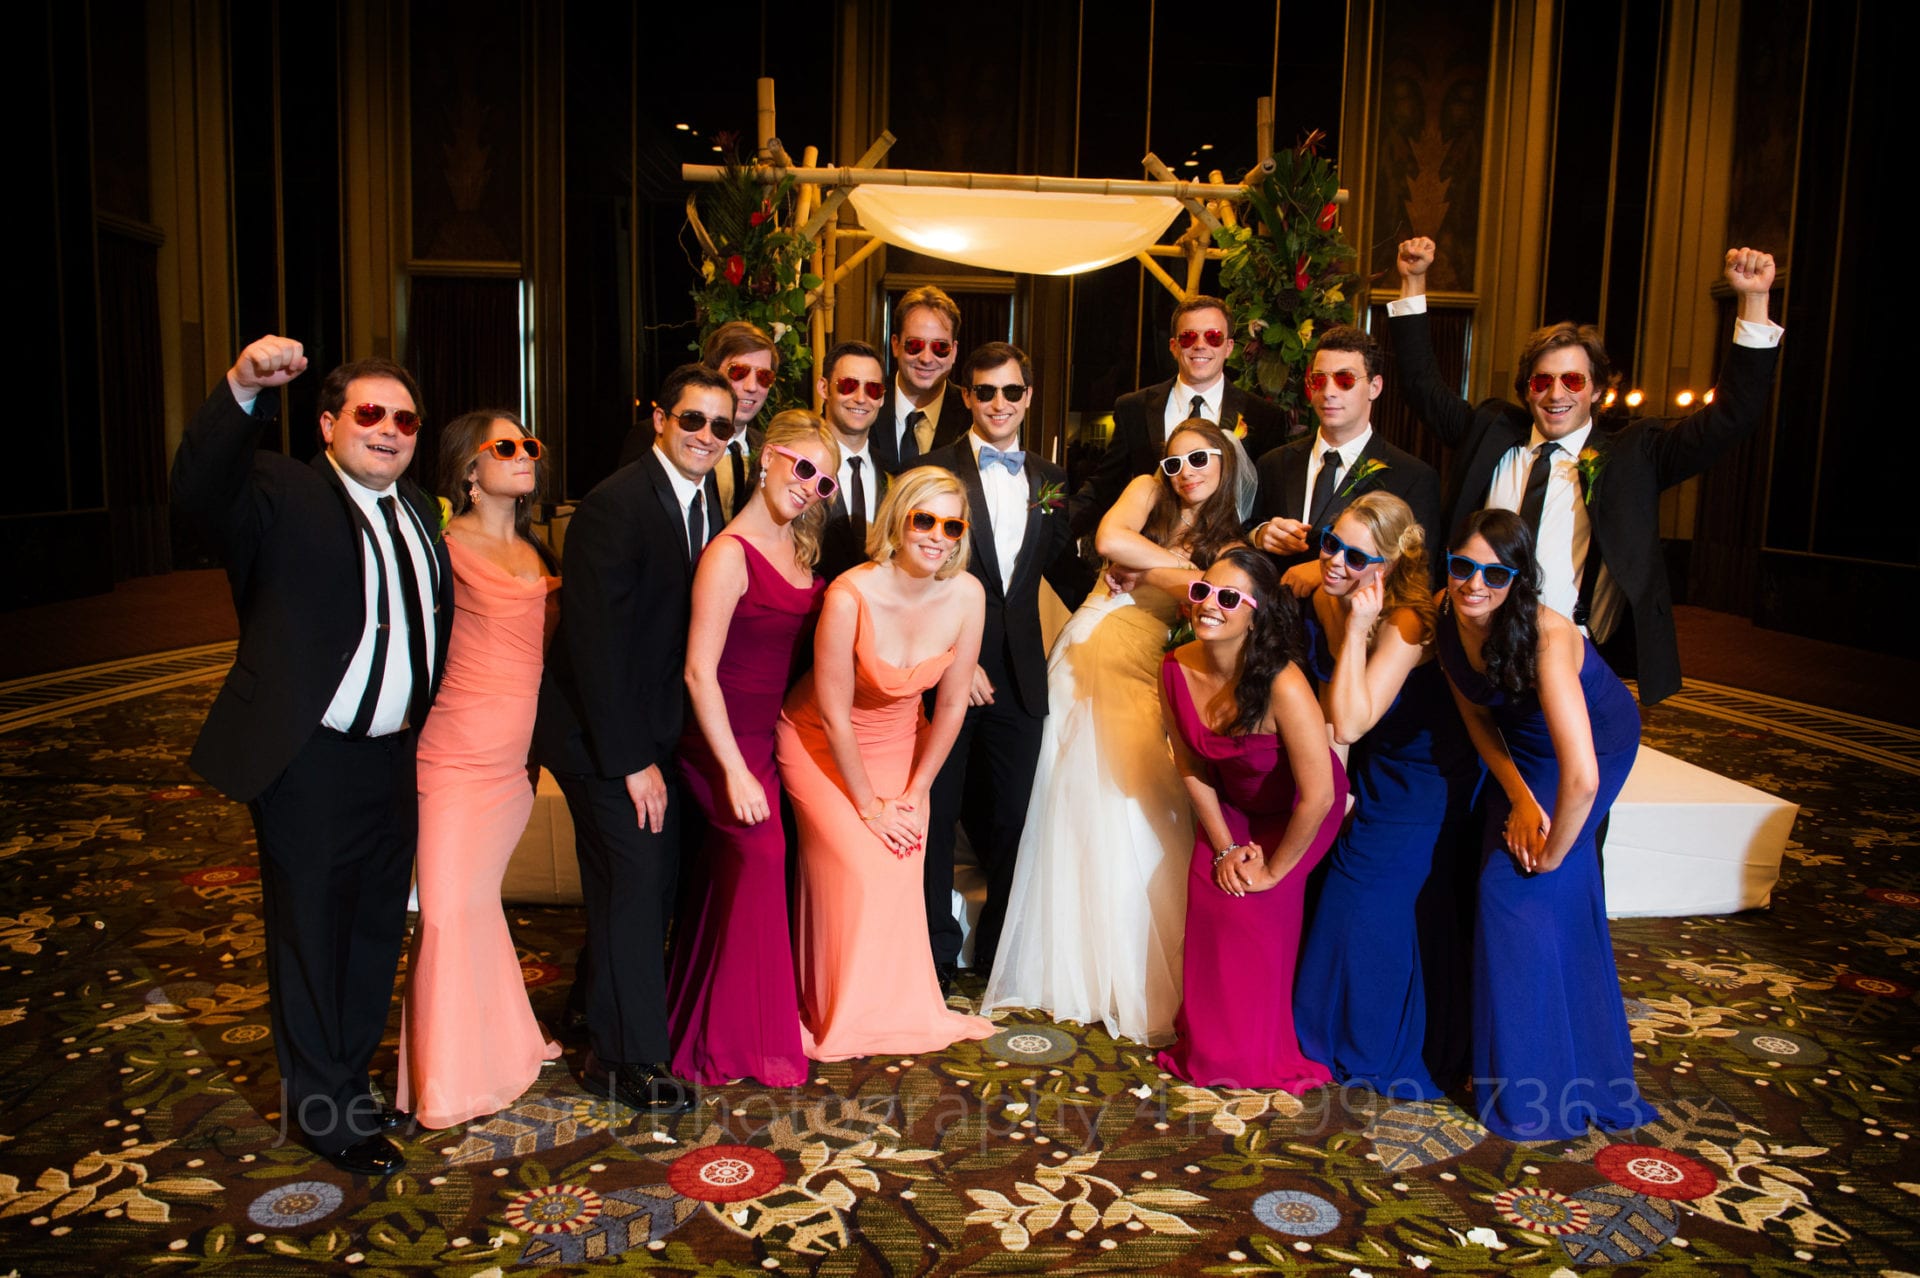 a wedding party wearing colorful sunglasses stands together